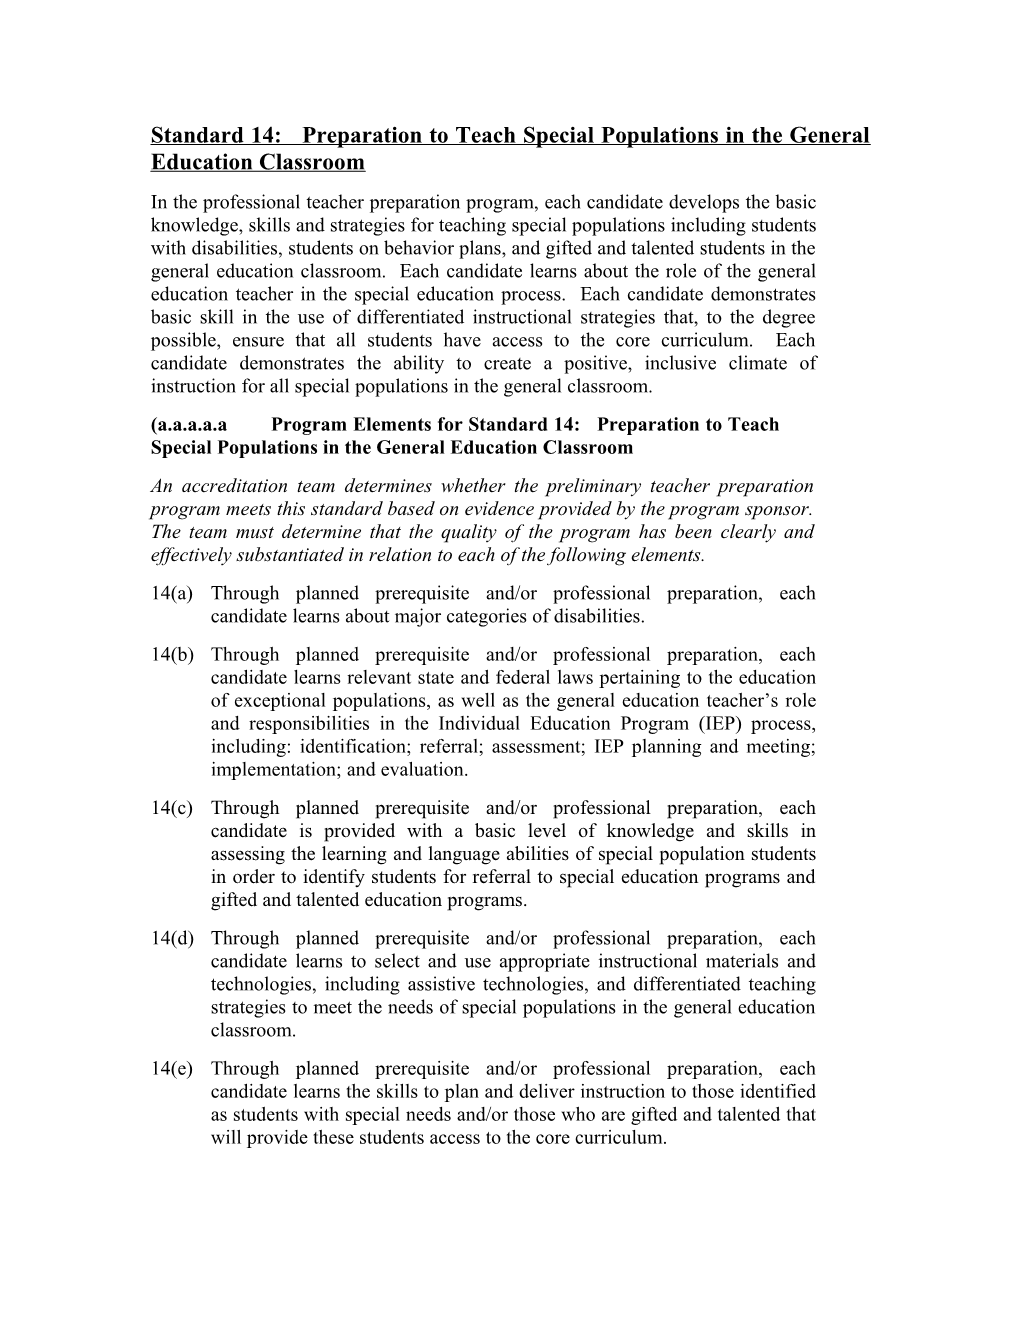 Standard 14: Preparation to Teach Special Populations in the General Education Classroom